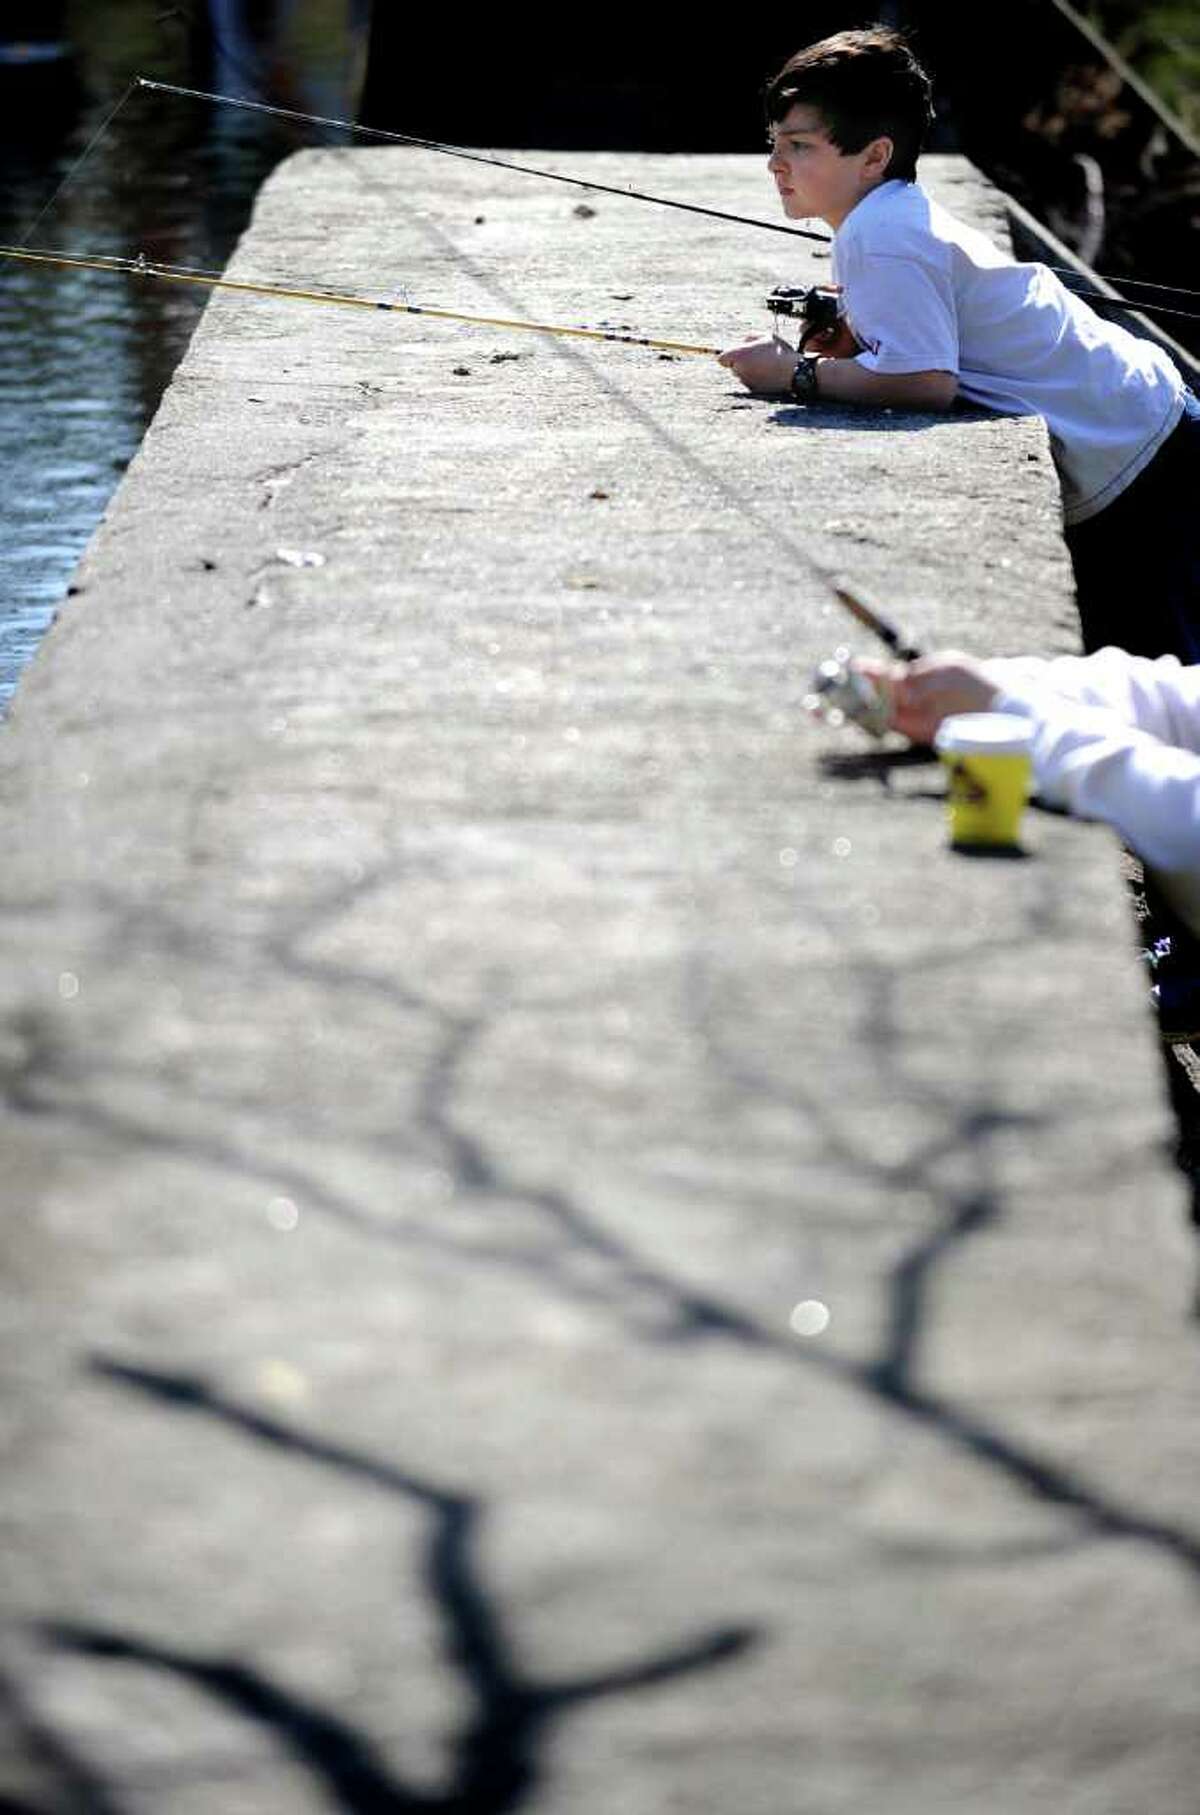 Ten-year-old Clayton McGoldrick, of Southport, waits for a bite Saturday, April 9, 2011 during the annual PAL fishing derby at Gould Manor Park in Fairfield, Conn.